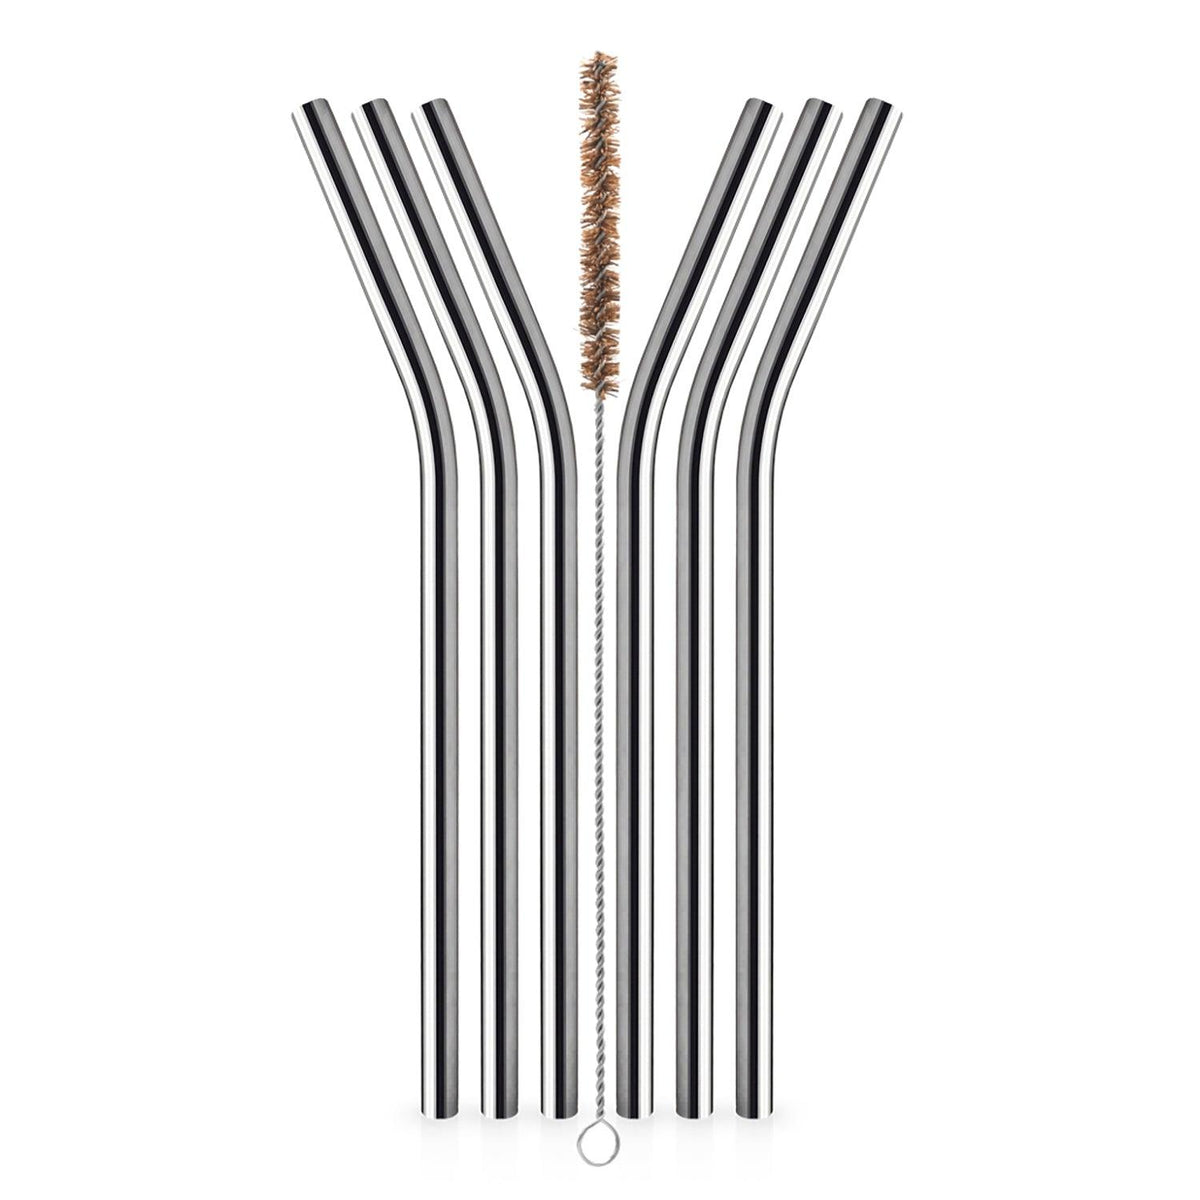 Stainless Steel Straws - Set of 6 Reusable Eco-Straws & a Cleaning Brush - Food grade and BPA free